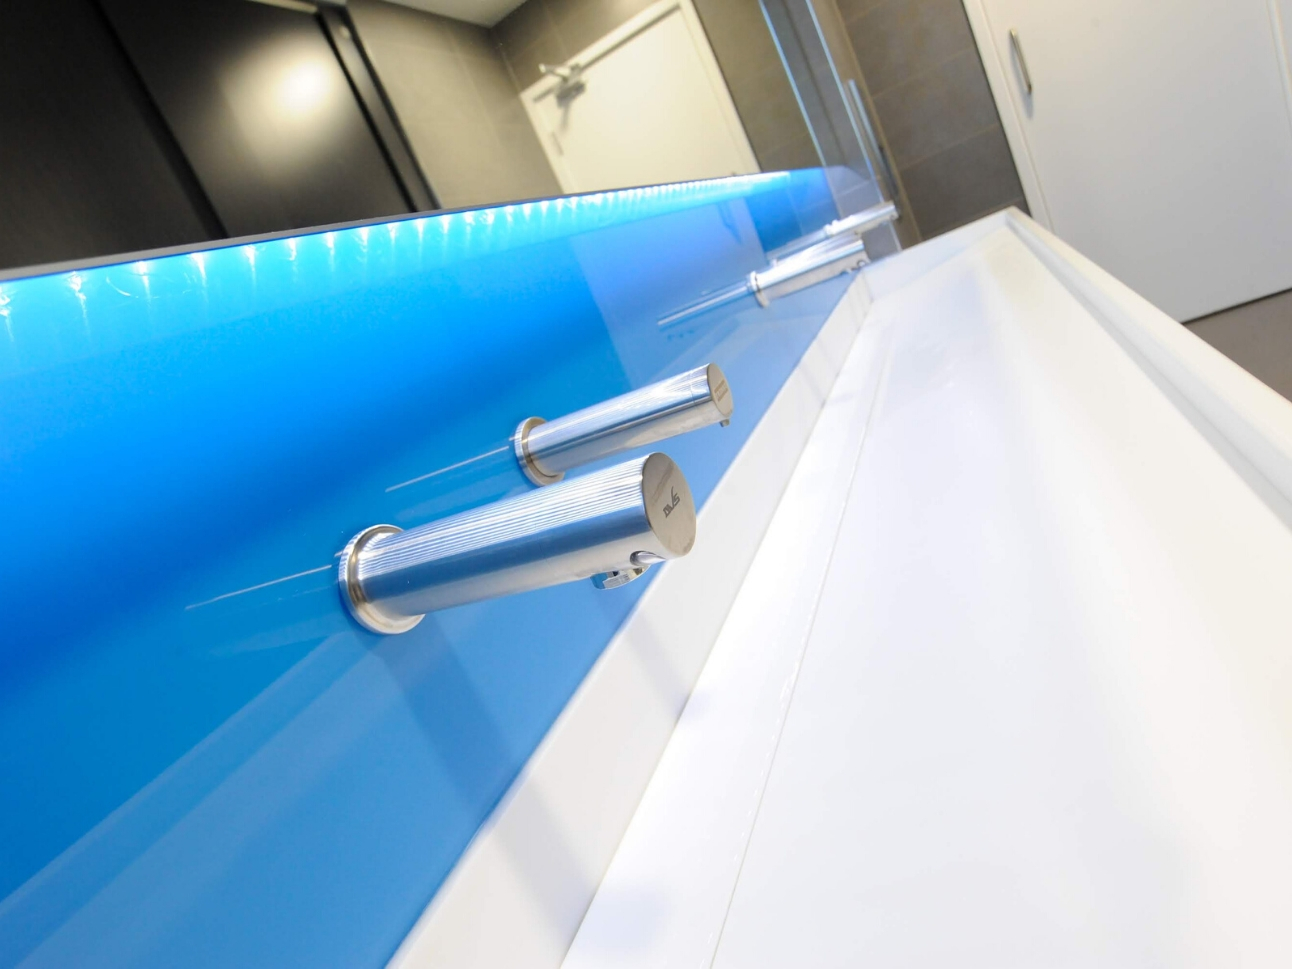 North London Charity | Case Study | Commercial Washroom